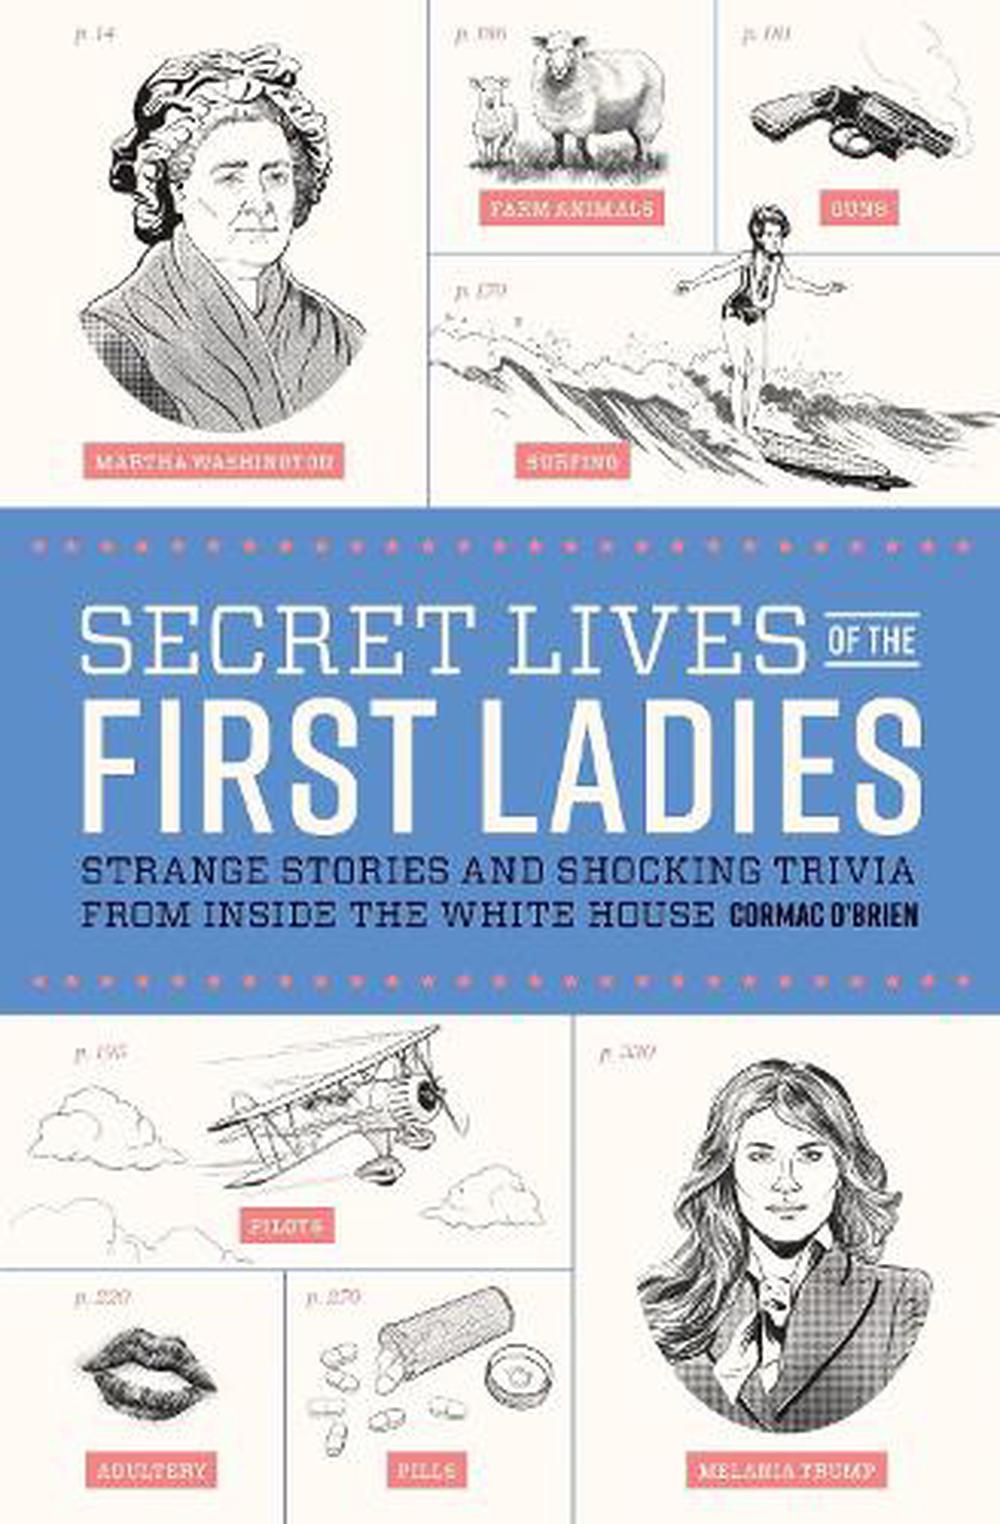 Secret Lives of the First Ladies by Cormac O